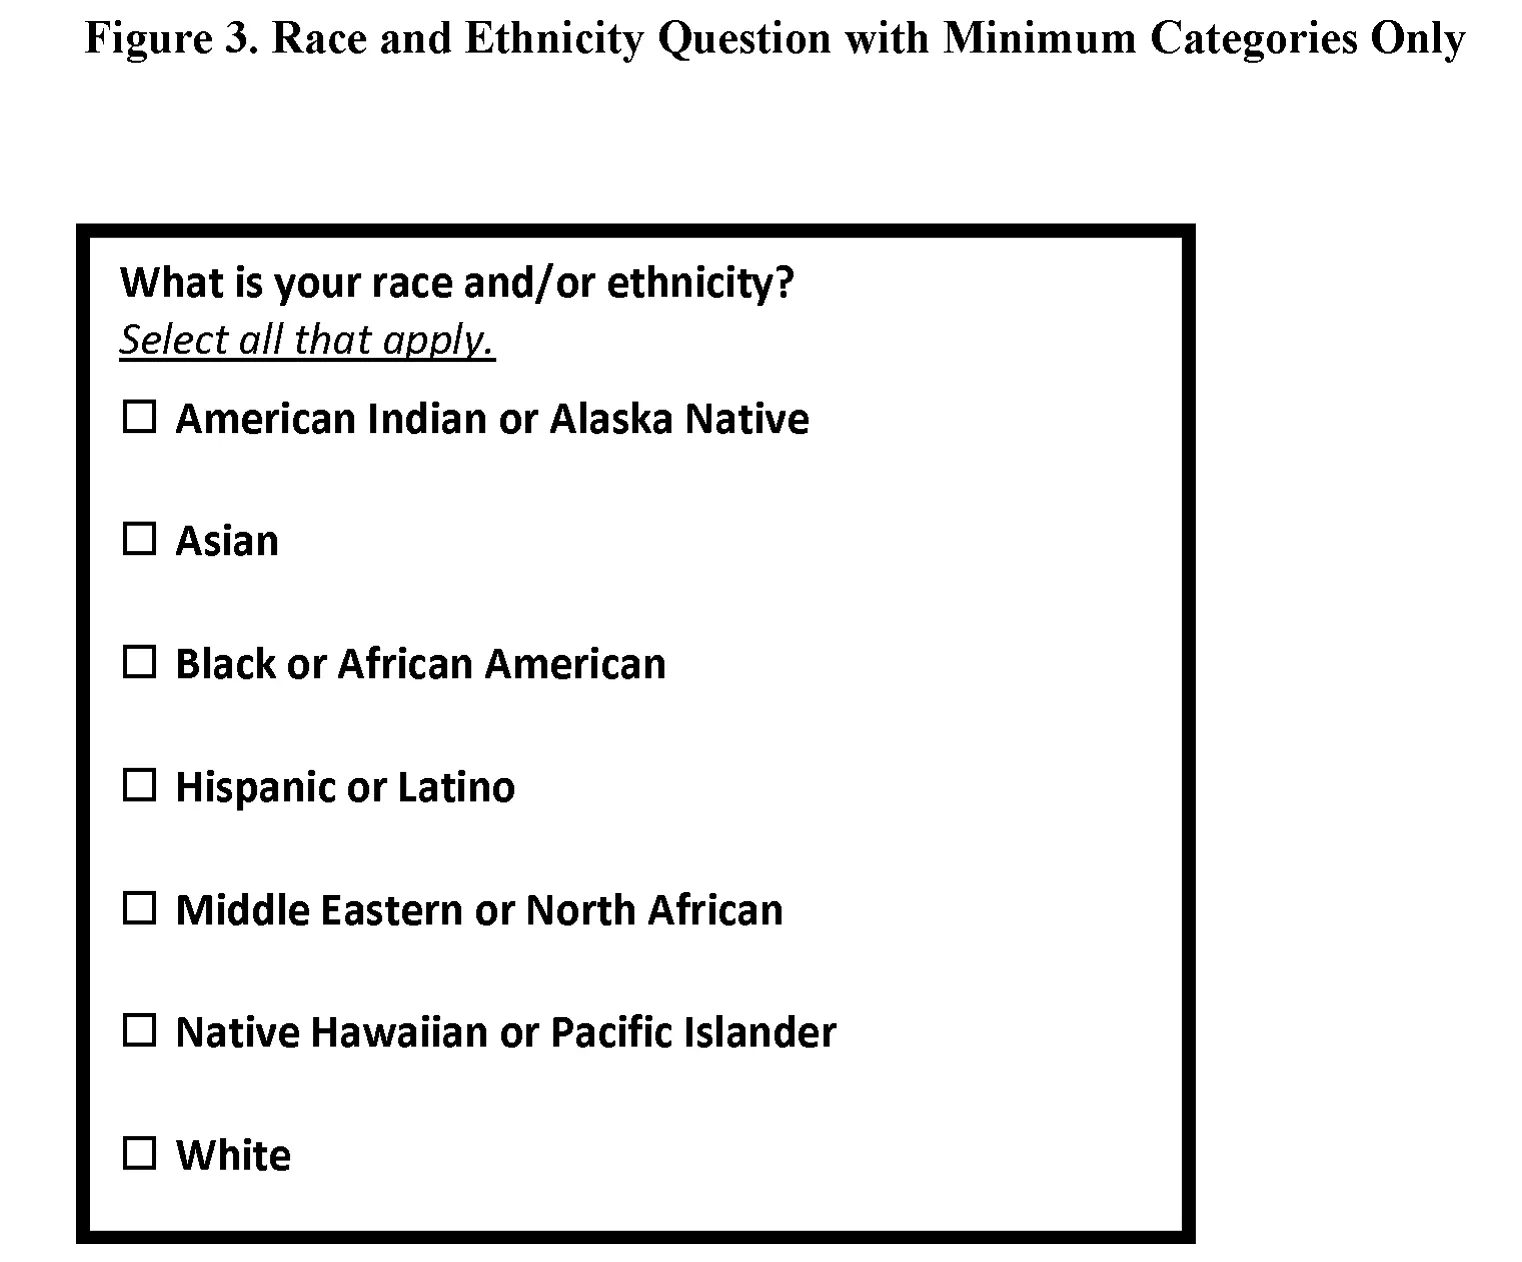 Screenshot of race and ethnicity question with several categories including Middle Eastern or North African